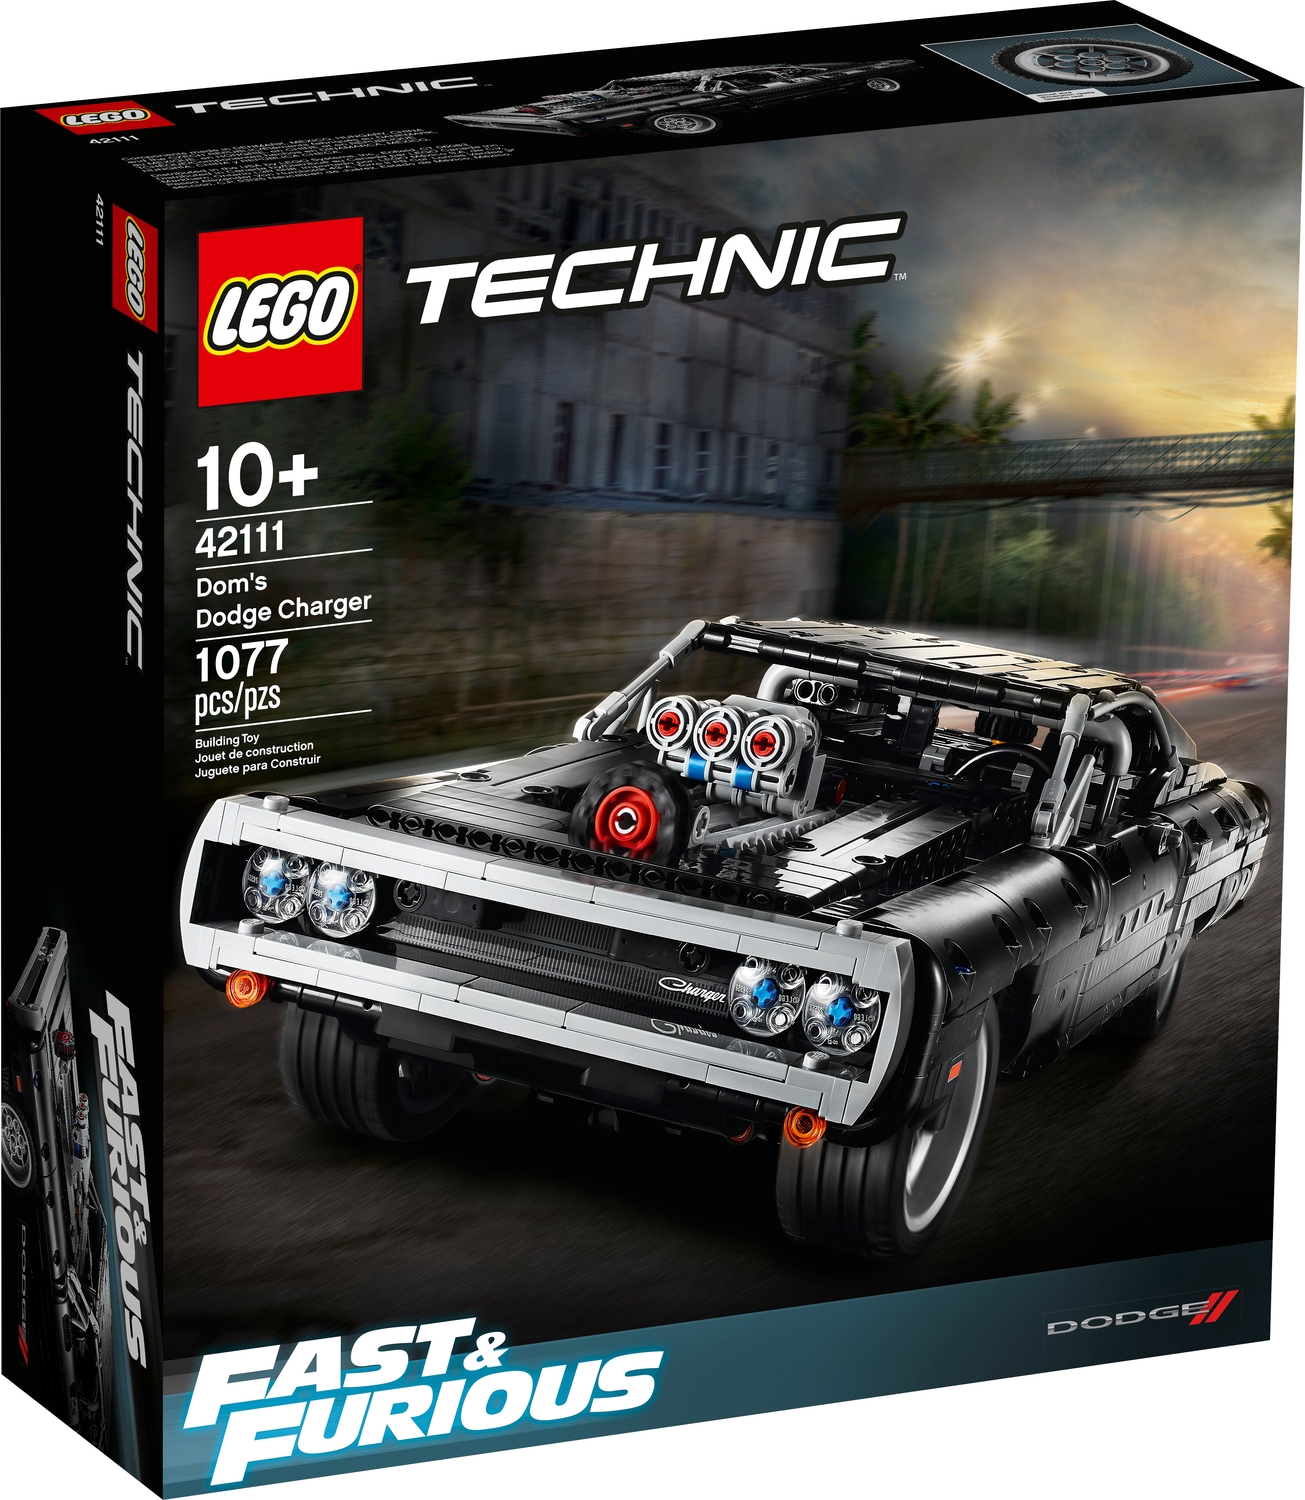 LEGO goes Fast & Furious with Technic 42111 Dom's Dodge Charger